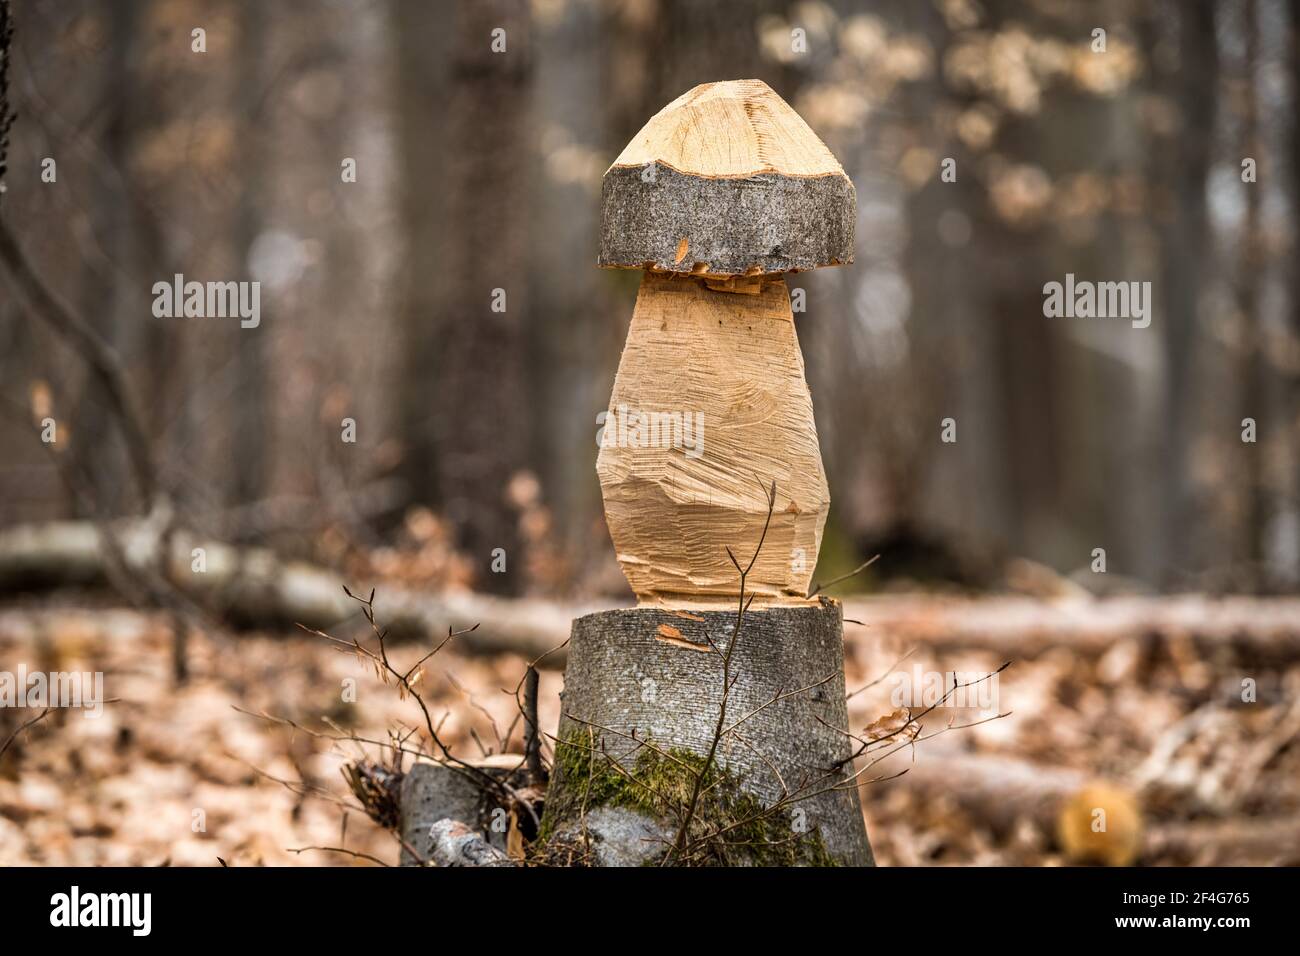 Wood carving in the forest in the form of a mushroom Stock Photo